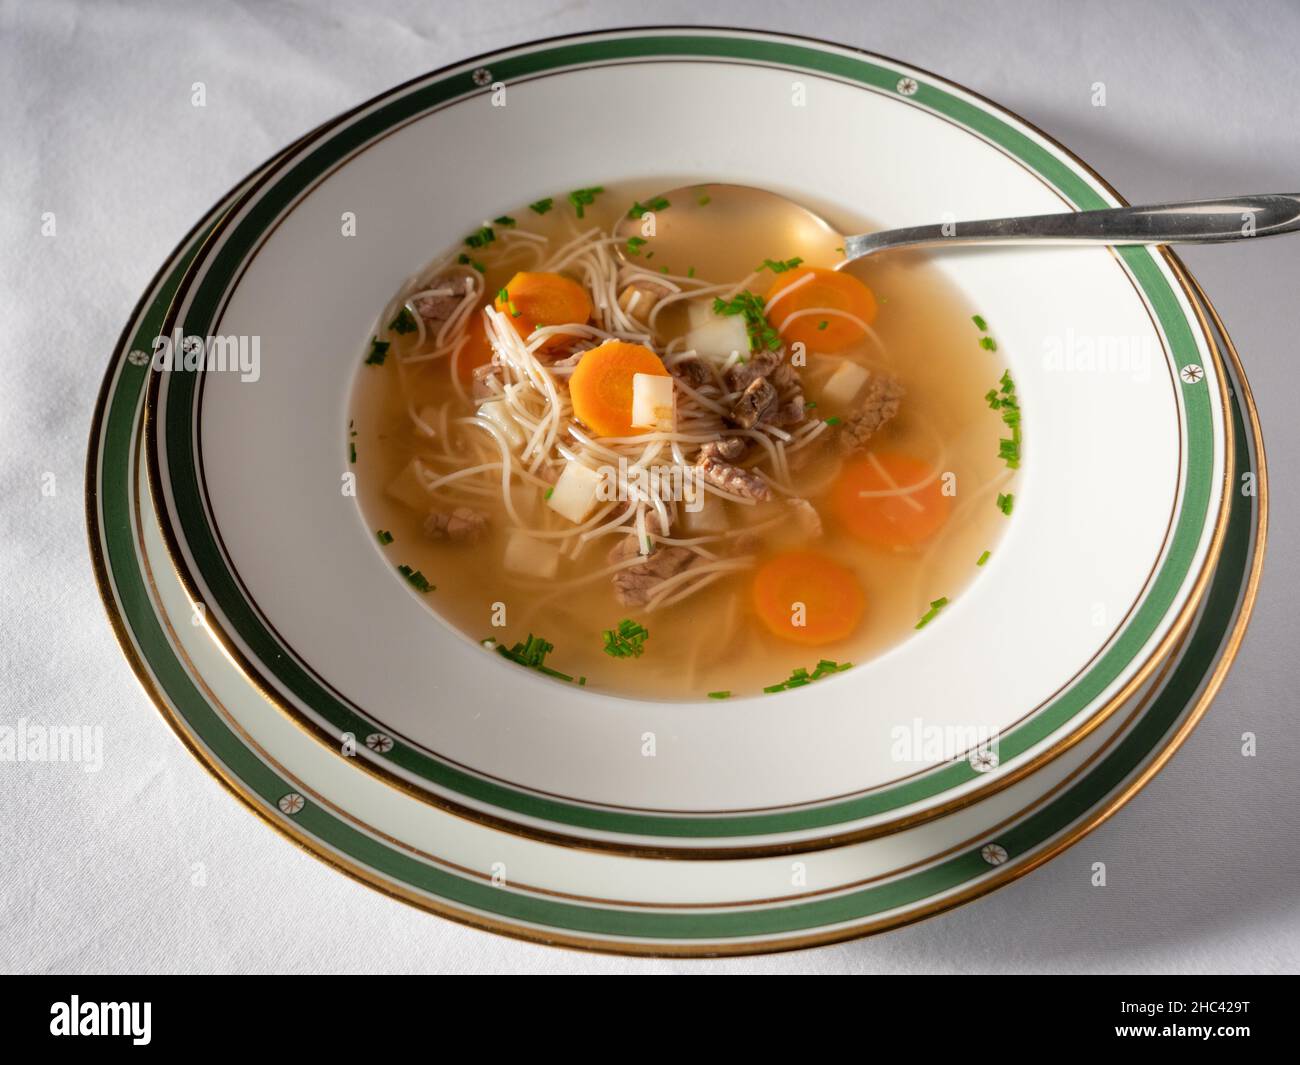 Altwiener Suppentopf or Old Vienna Style Soup Pot with boiled Beef, Noodles and Carrots Stock Photo